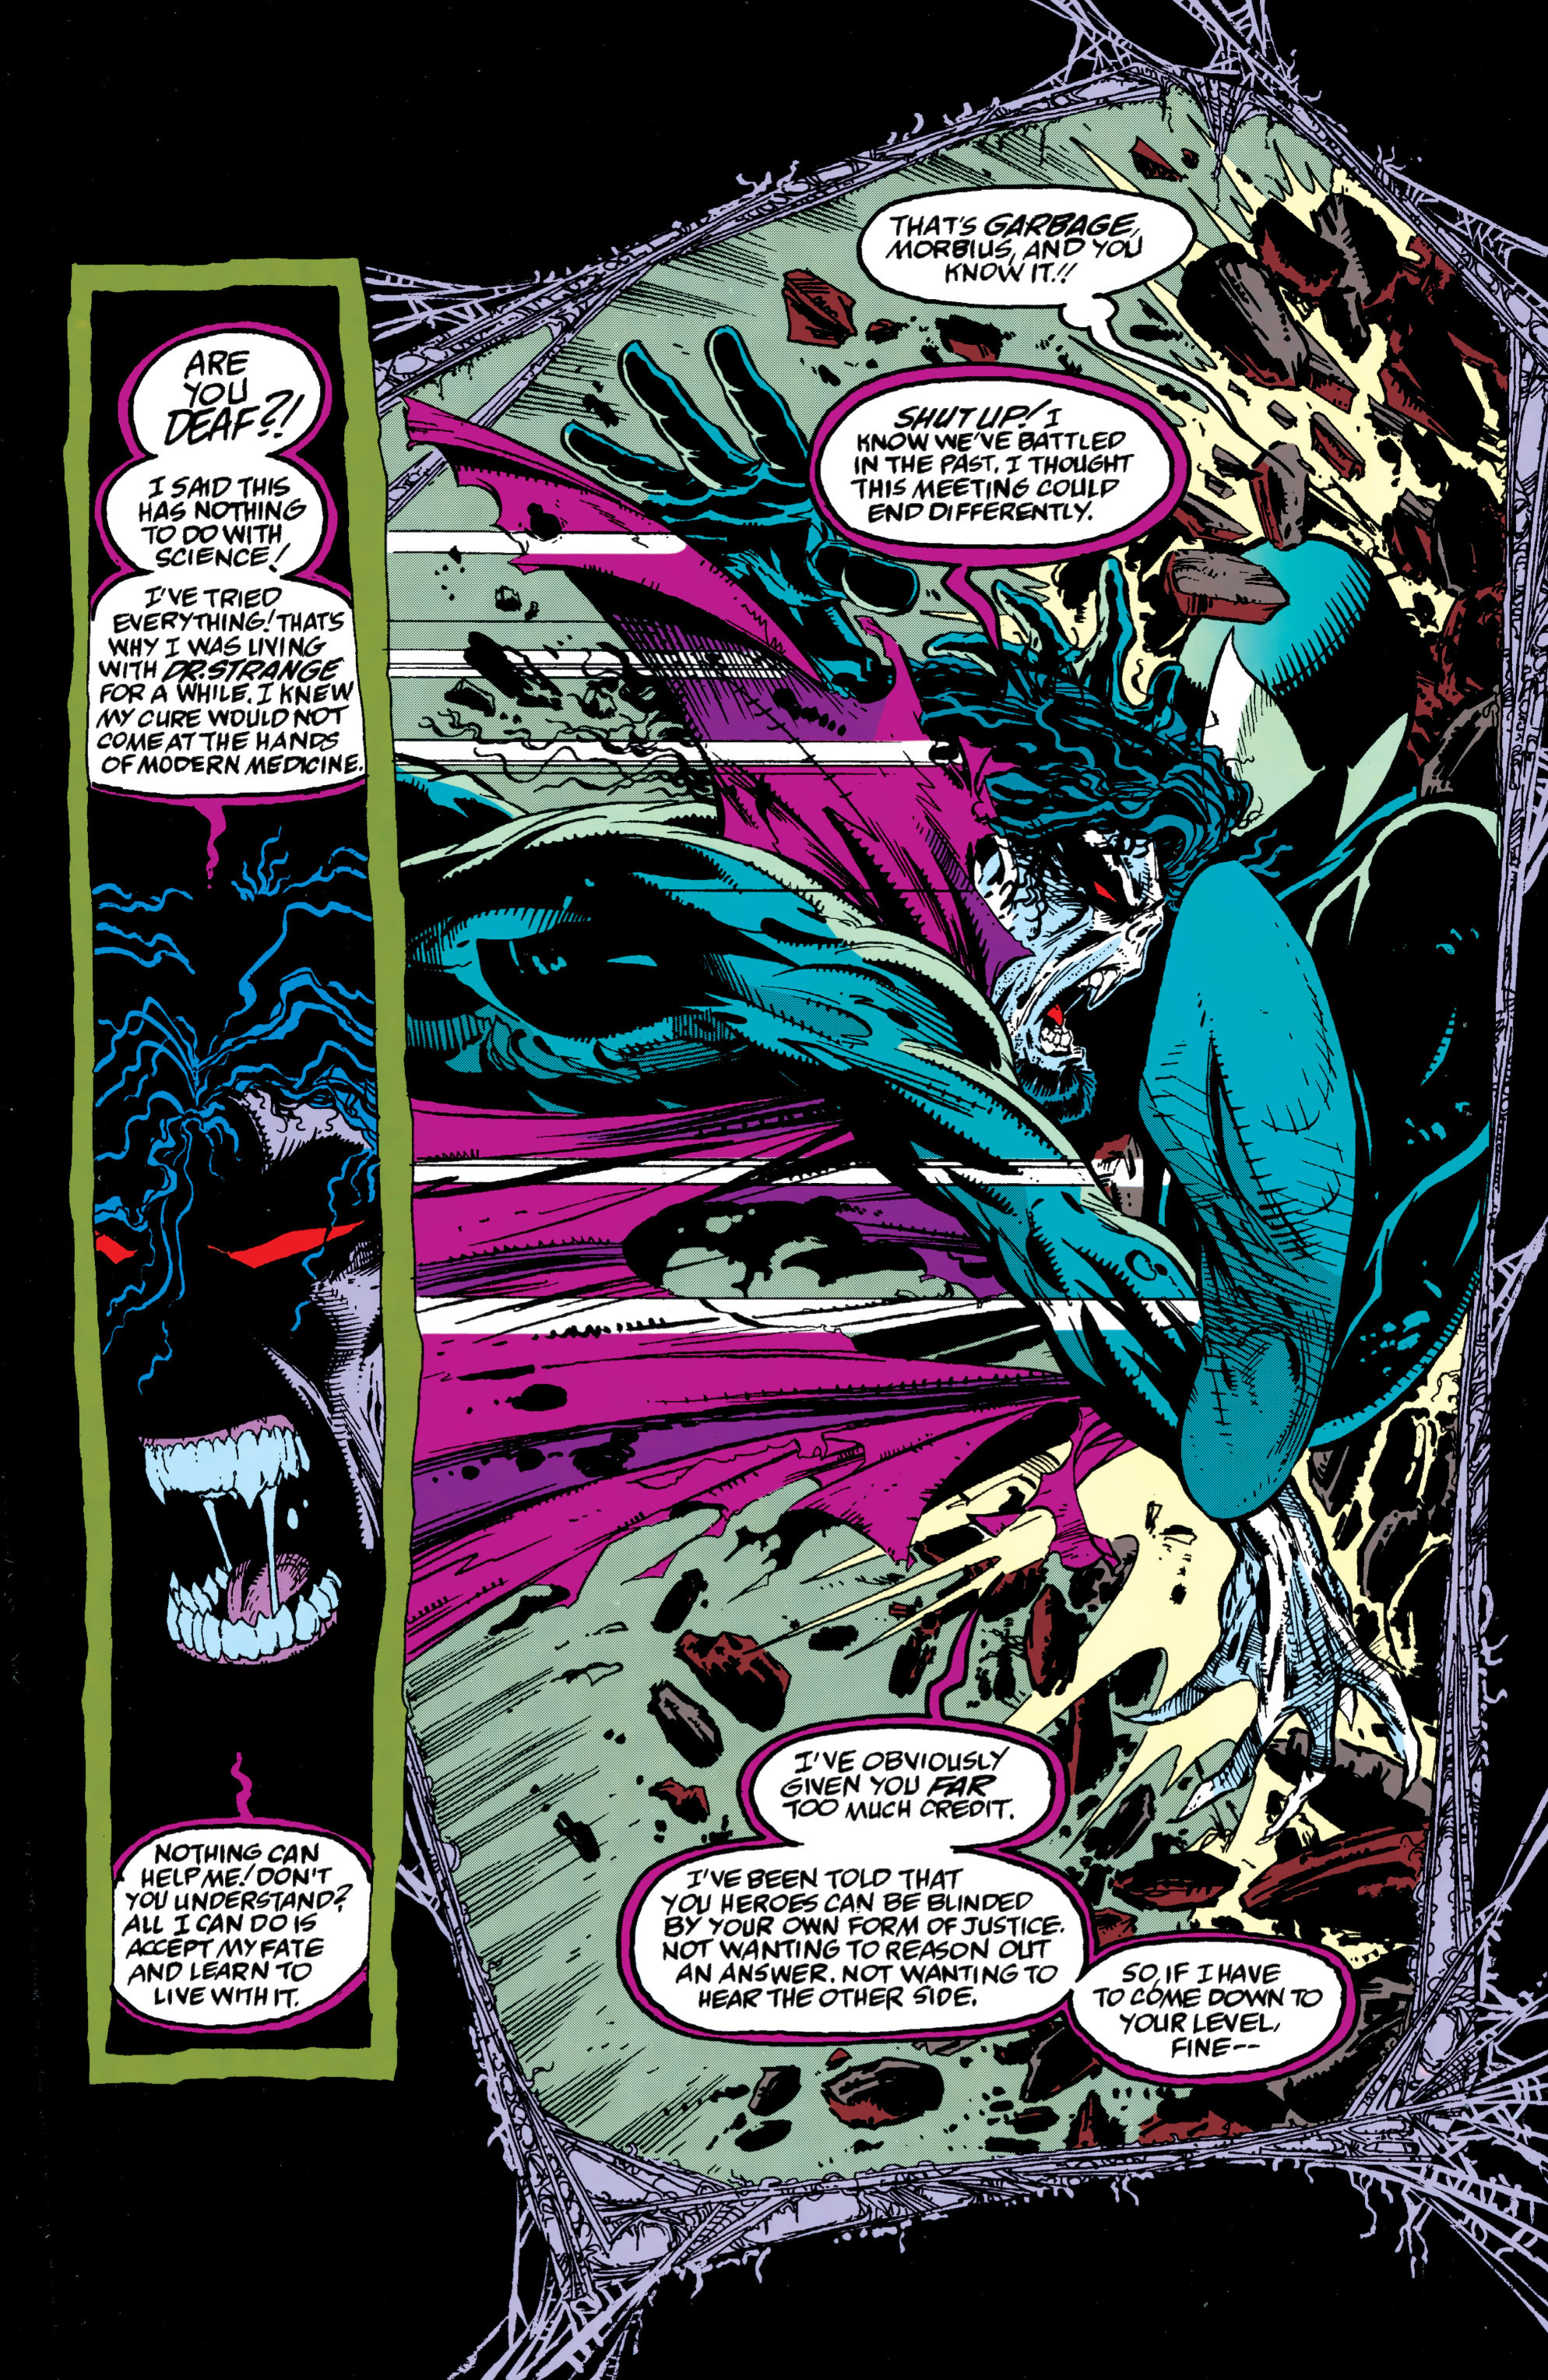 Spider-Man (1990) 14_-_Sub_City_Part_2_of_2 Page 14